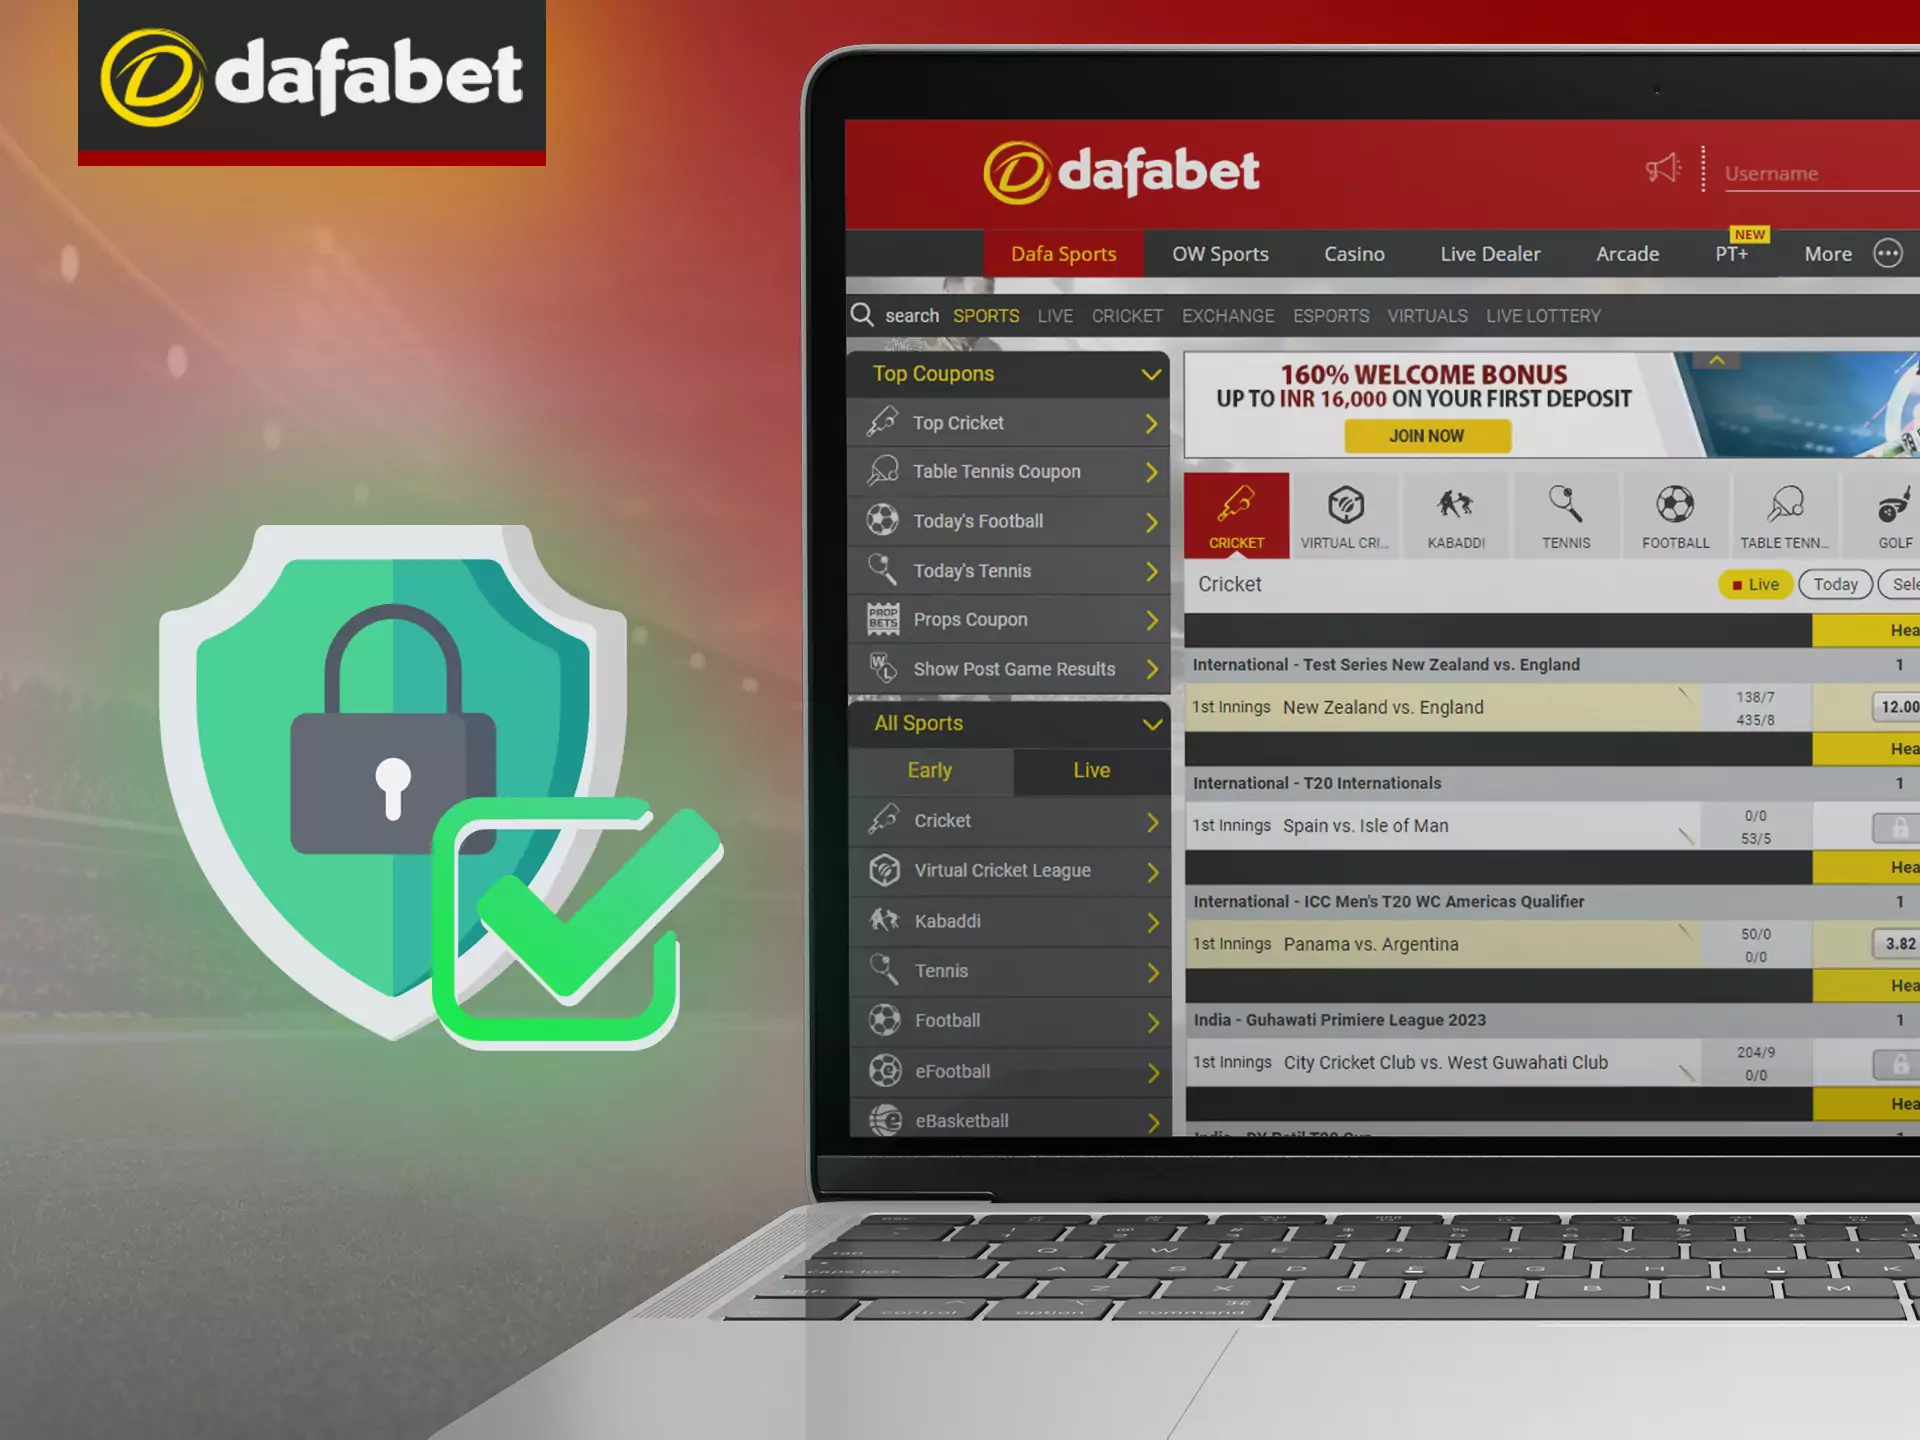 The Dafabet website is safe for players and is responsible for the security of user data.